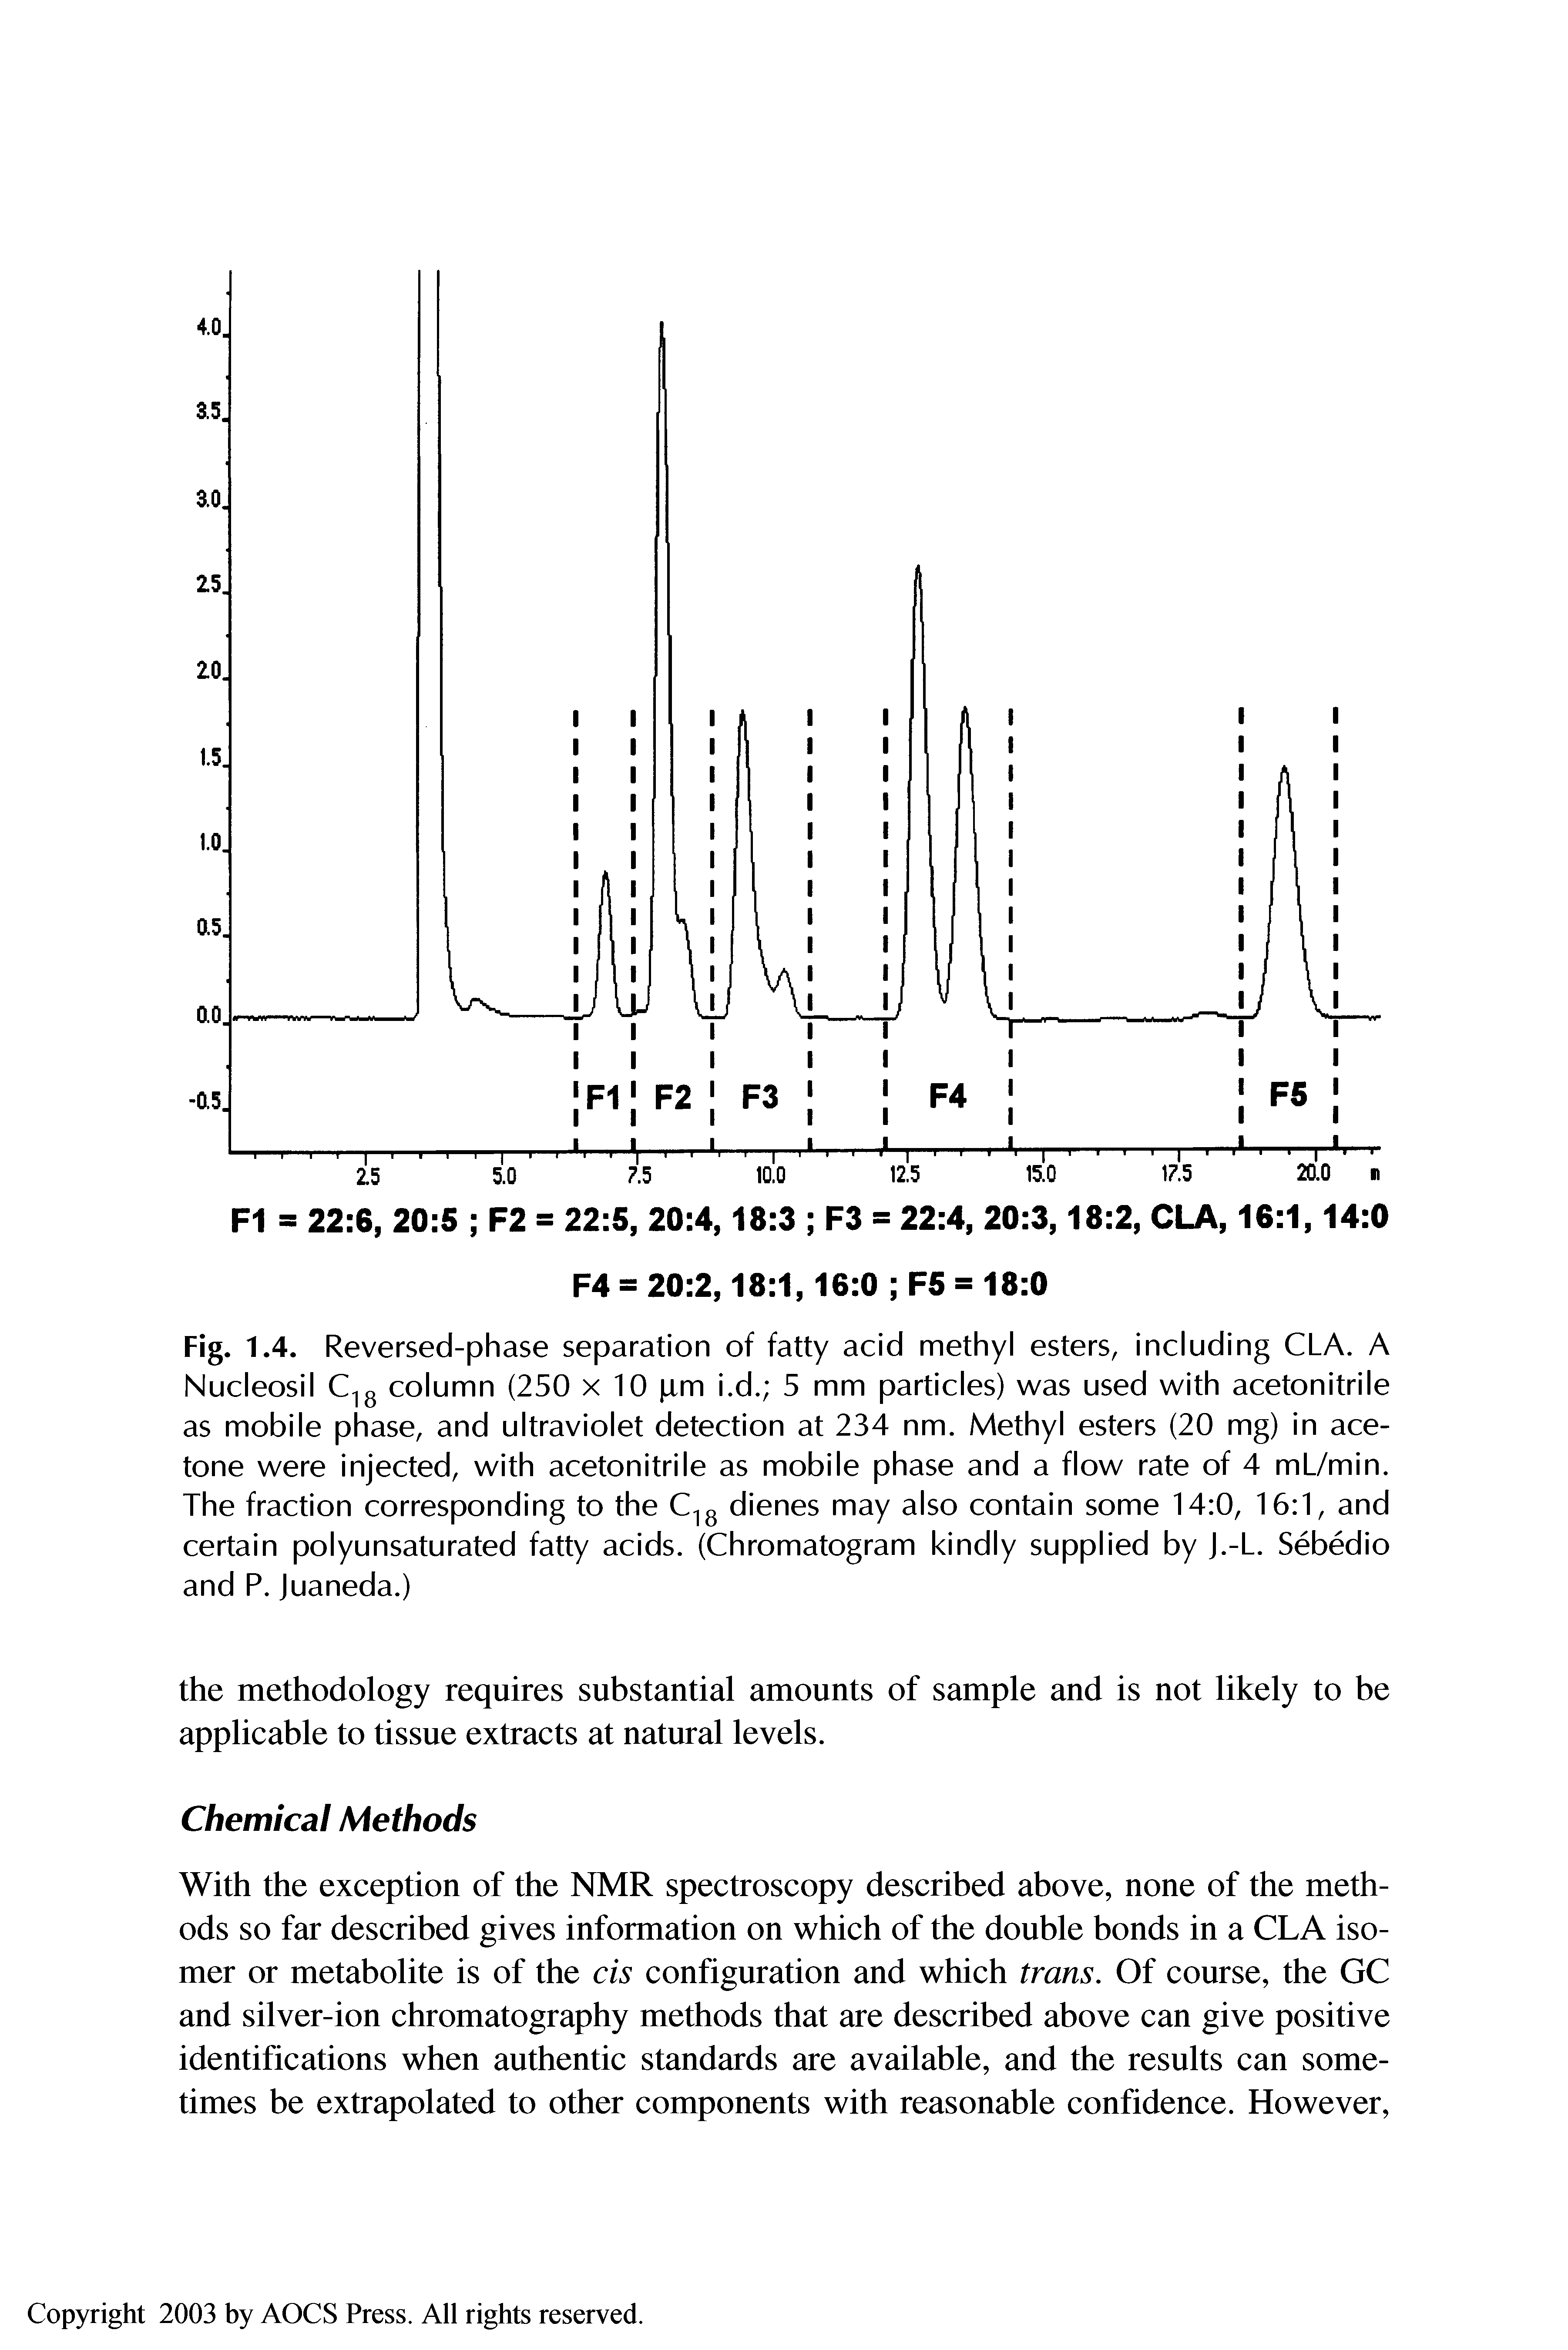 Fig. 1.4. Reversed-phase separation of fatty acid methyl esters, including CLA. A Nucleosil C g column (250 x 10 jim i.d. 5 mm particles) was used with acetonitrile as mobile phase, and ultraviolet detection at 234 nm. Methyl esters (20 mg) in acetone were injected, with acetonitrile as mobile phase and a flow rate of 4 mL/min. The fraction corresponding to the C g dienes may also contain some 14 0, 16 1, and certain polyunsaturated fatty acids. (Chromatogram kindly supplied by J.-L. Sebedio and P. Juaneda.)...